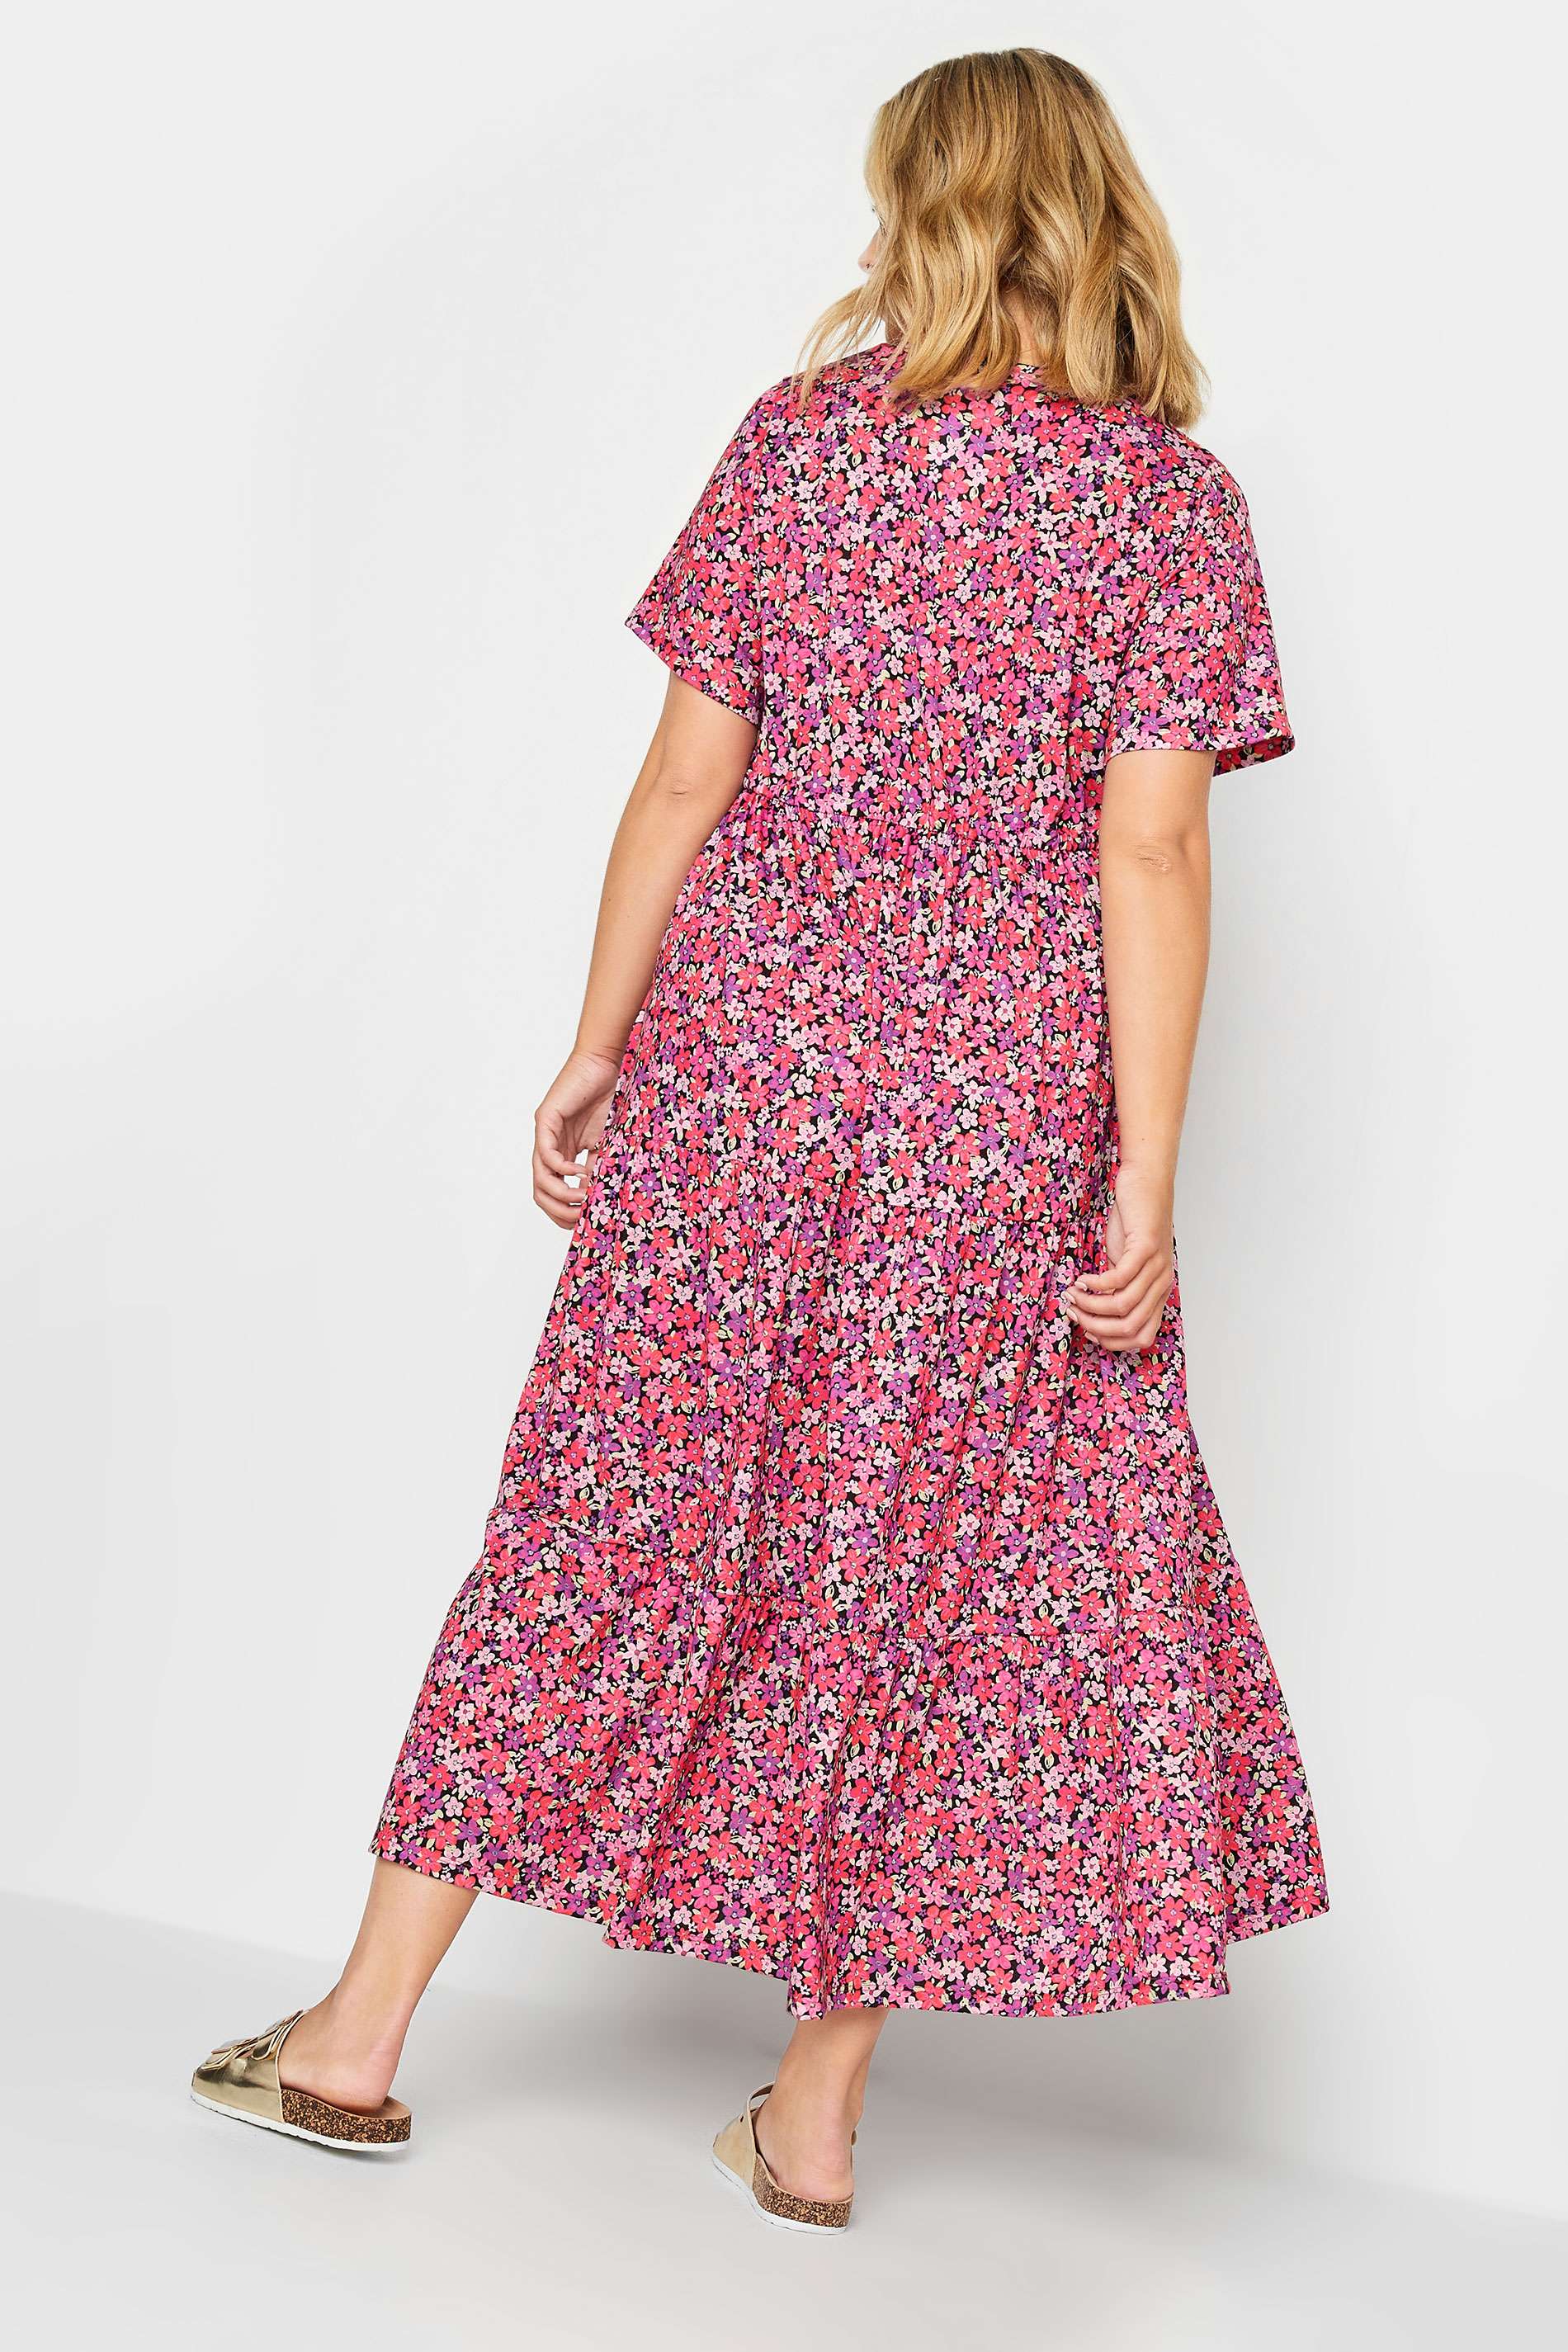 LIMITED COLLECTION Curve Plus Size Pink Floral Ditsy Adjustable Waist Maxi Dress | Yours Clothing 2